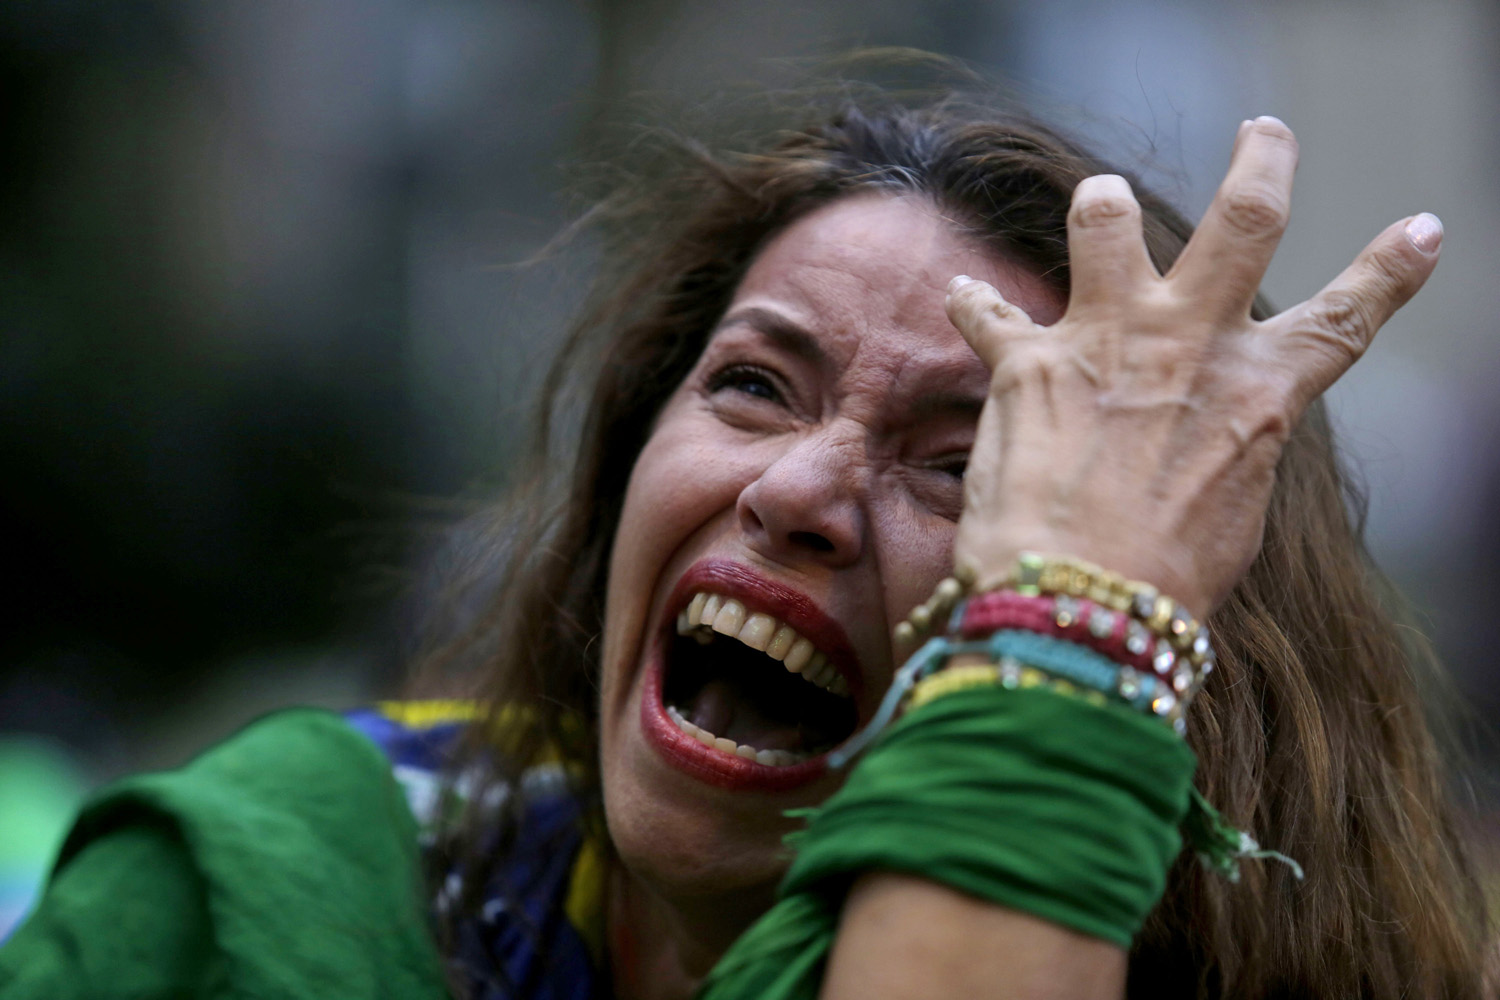 A Brazilian soccer fan cries as Germany scores against her team at a semifinal World Cup match as she watches the game on a live telecast in Belo Horizonte, Brazil on July 8, 2014.